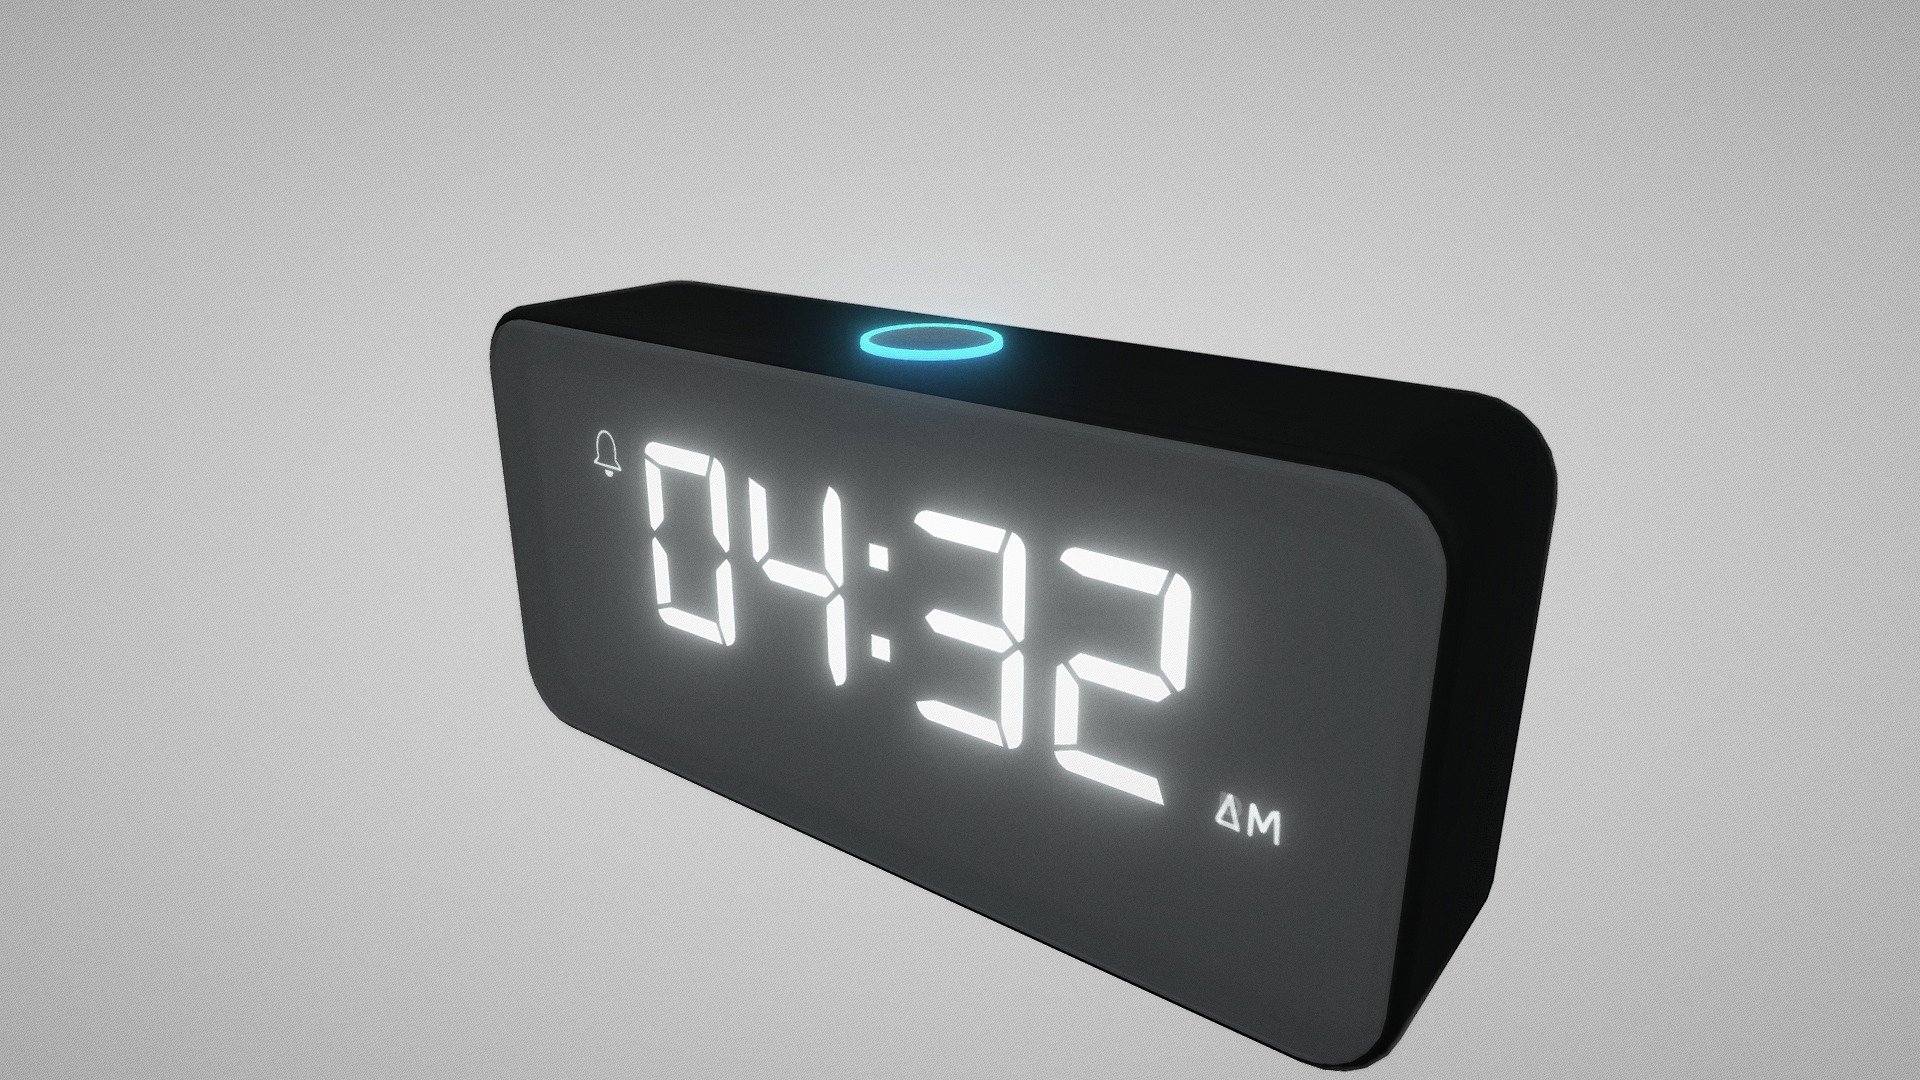 today i wake up late so, i miss work instead i made this :D - alarm clock - Download Free 3D model by Ndeg0101 (@Ndego101) 3d model